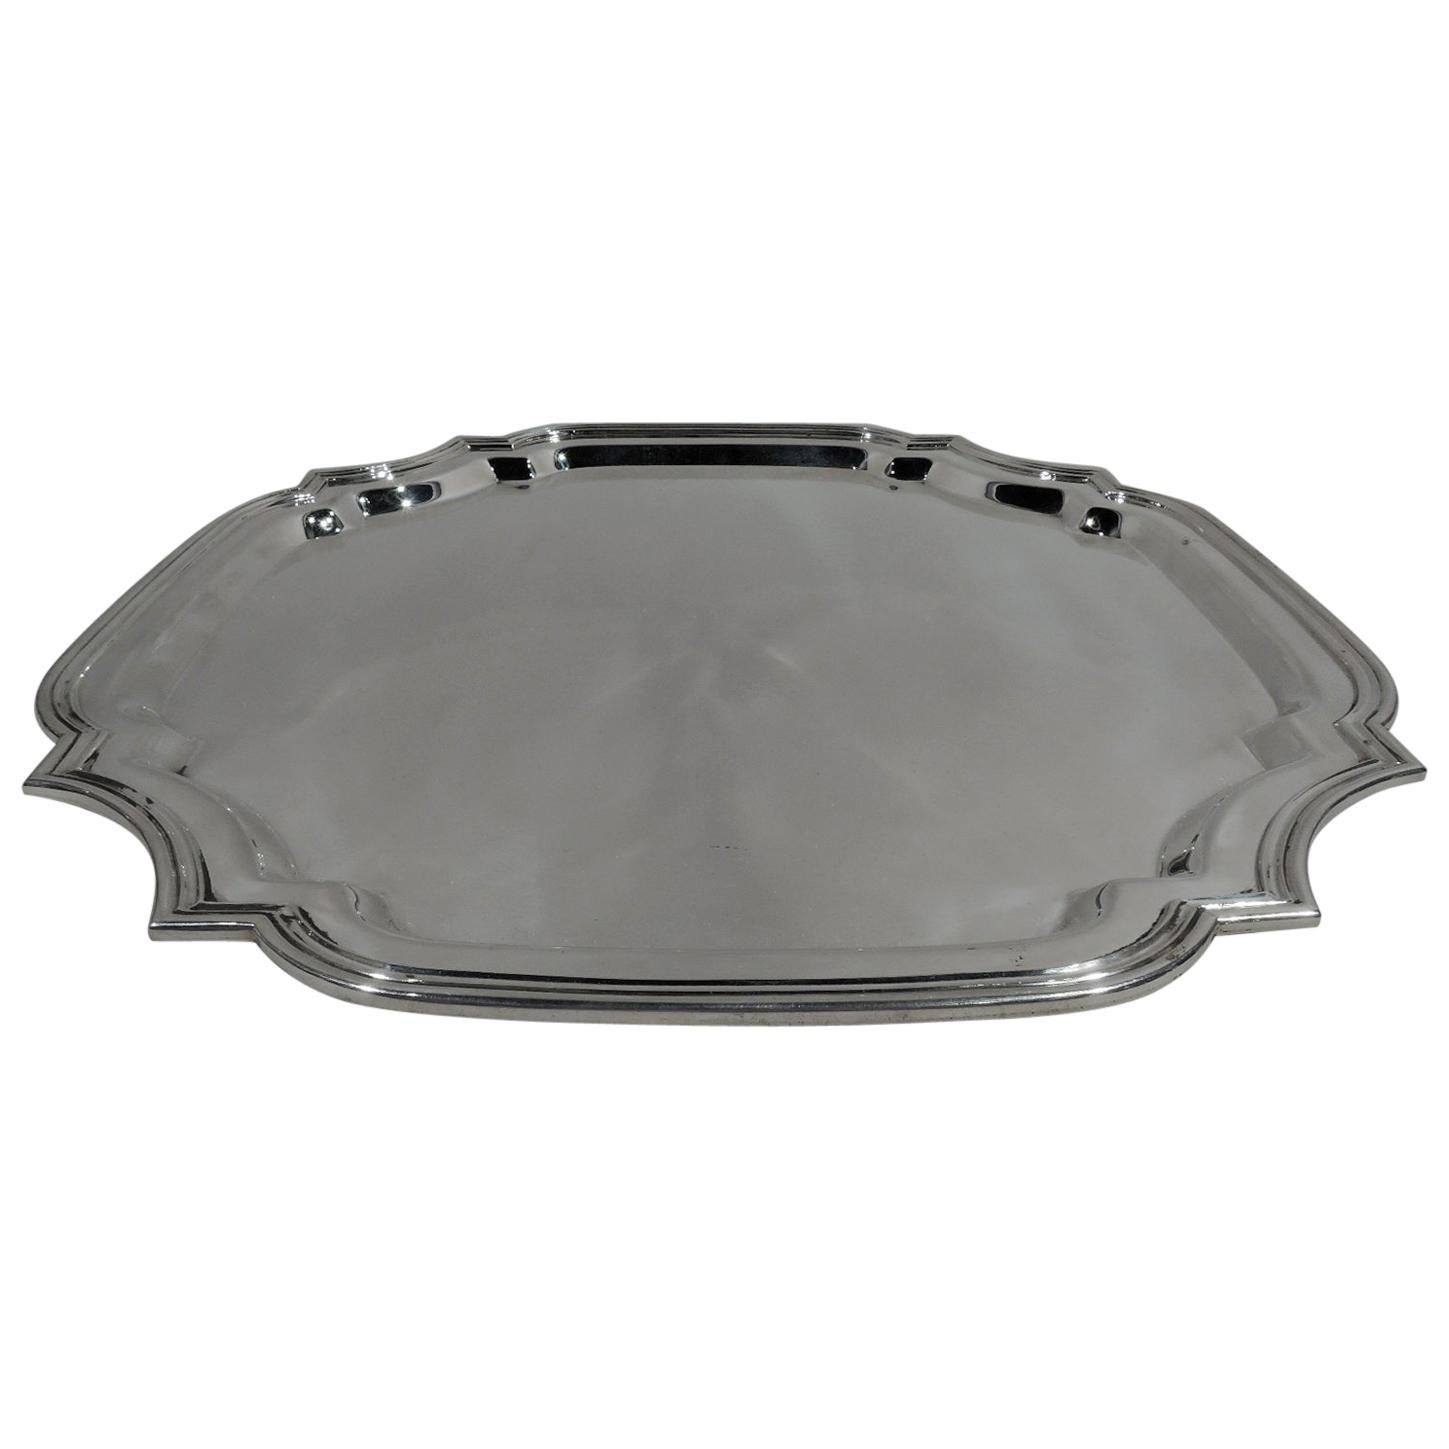 Cartier Heavy Georgian-Style Sterling Silver Cartouche Tray